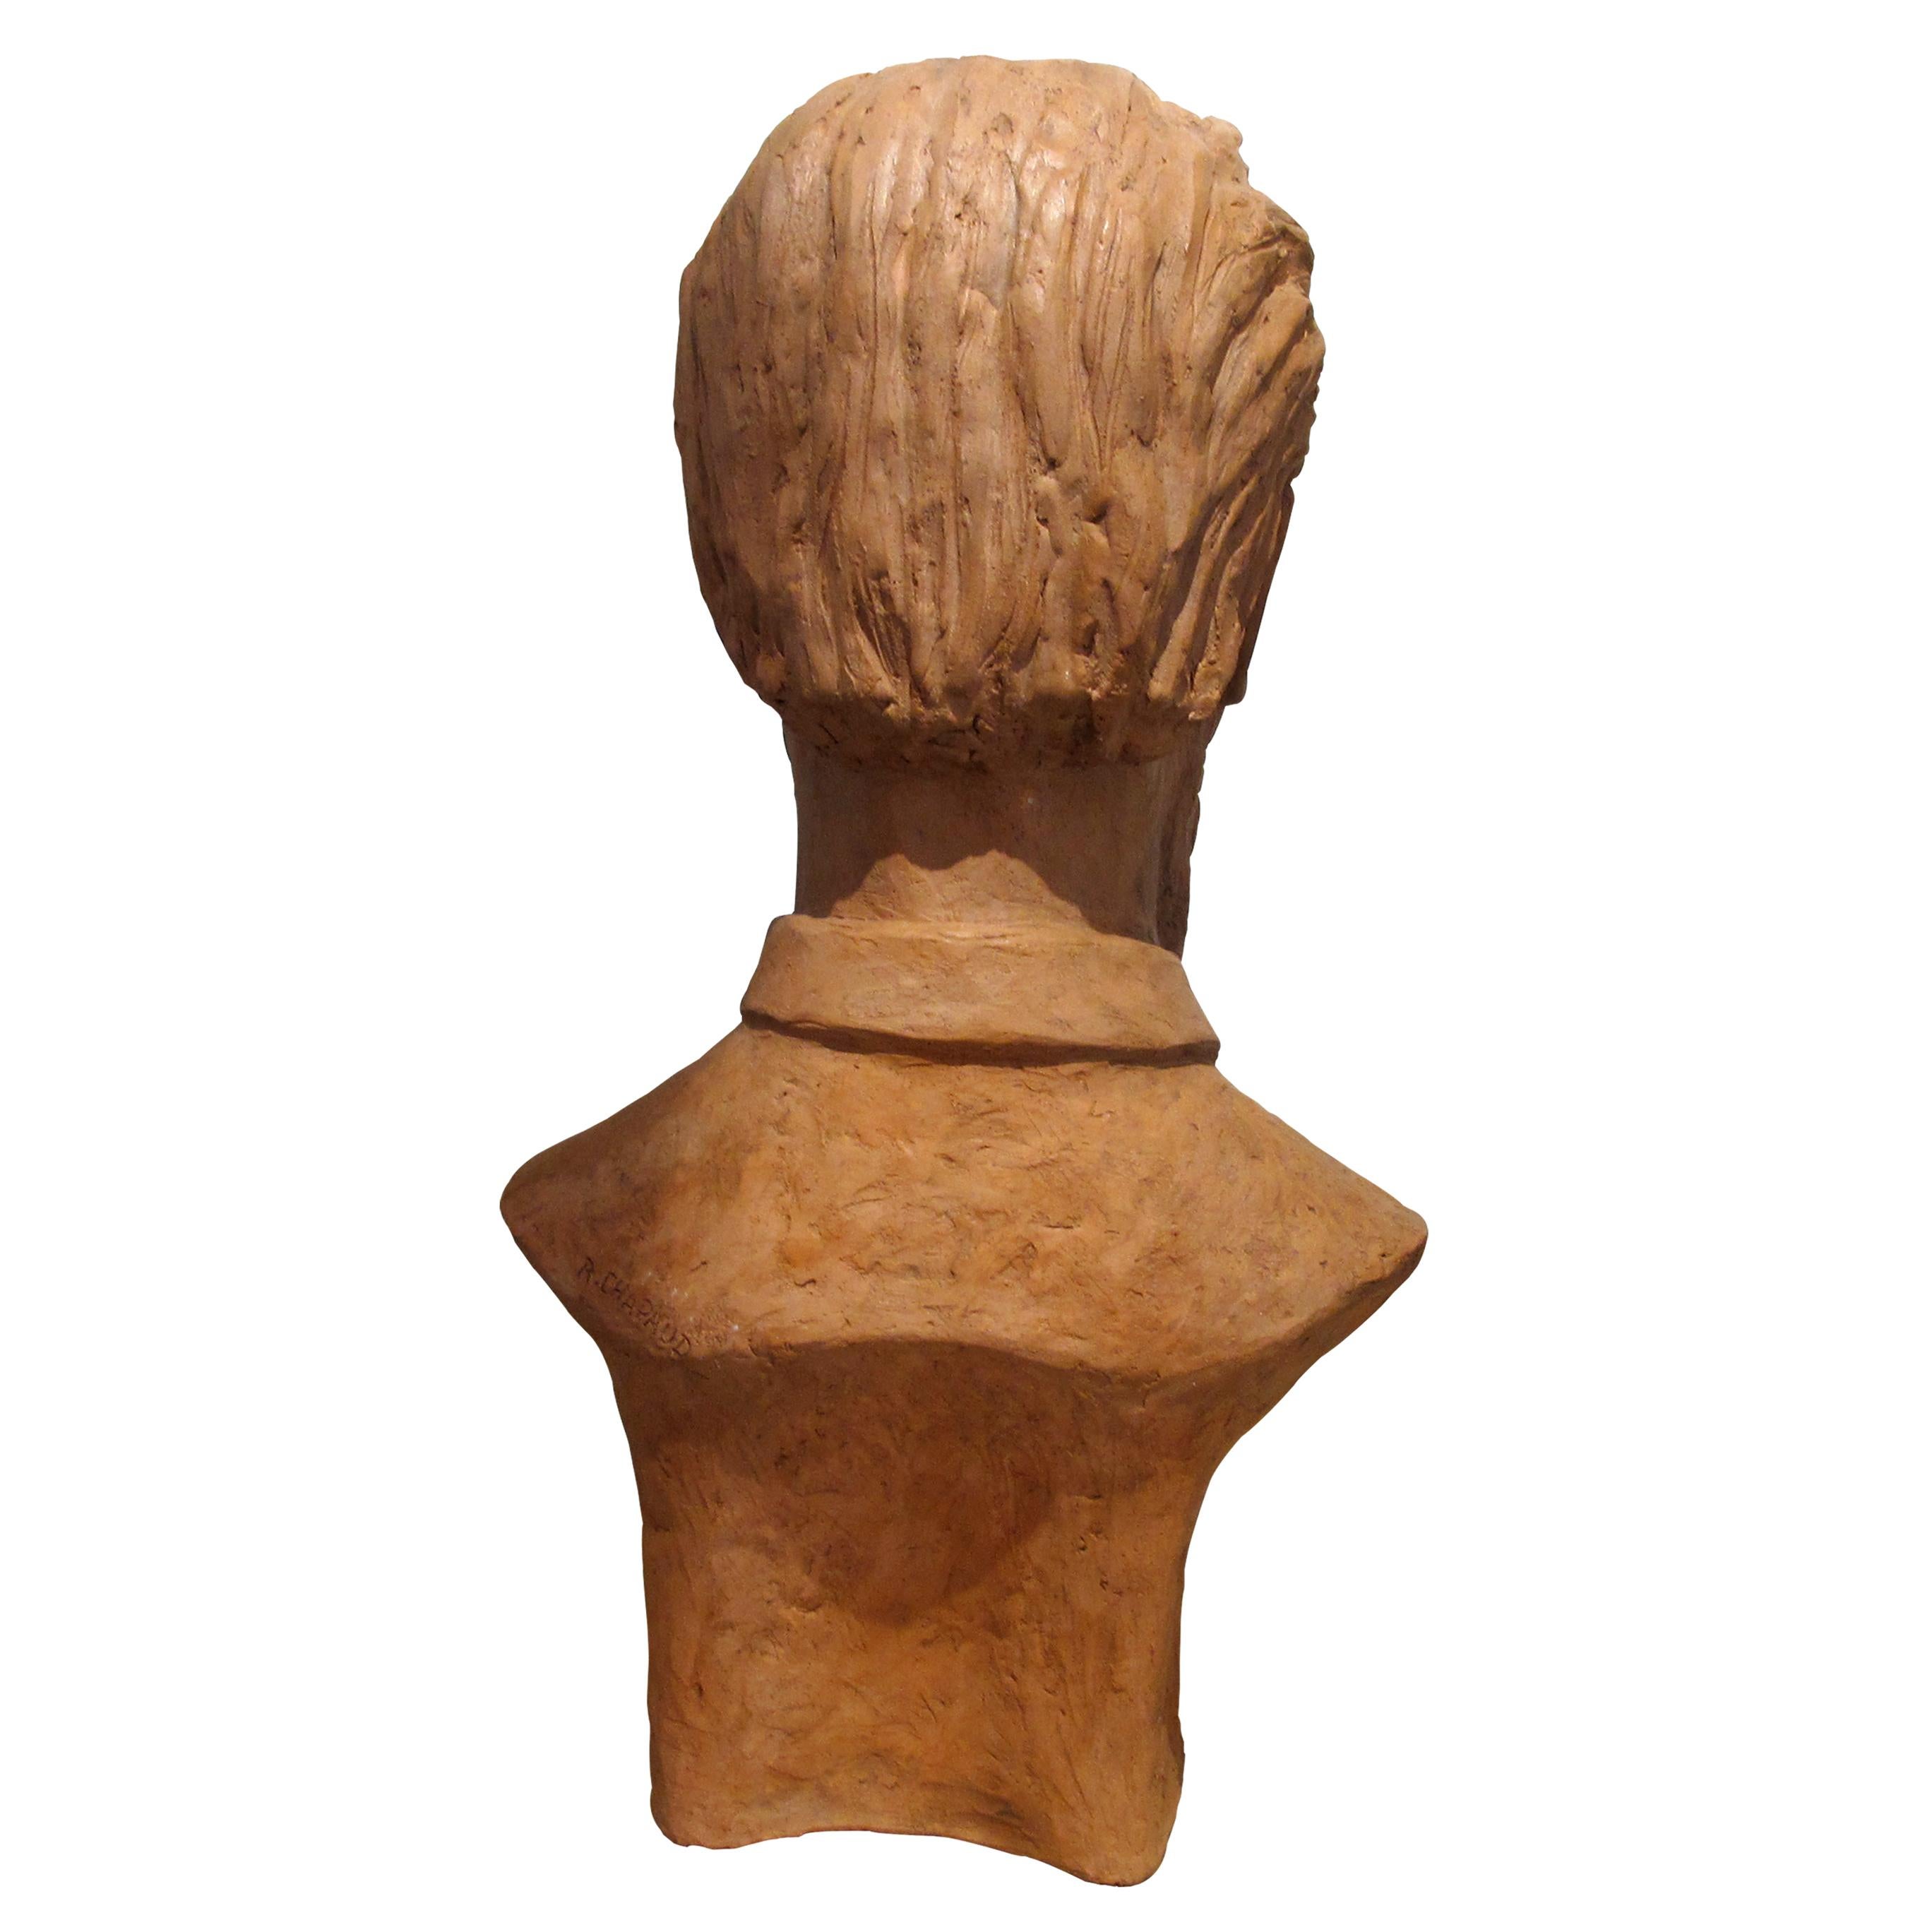 Unglazed 1950s French Terracotta Sculpture Bust Of A Chinese Man For Sale